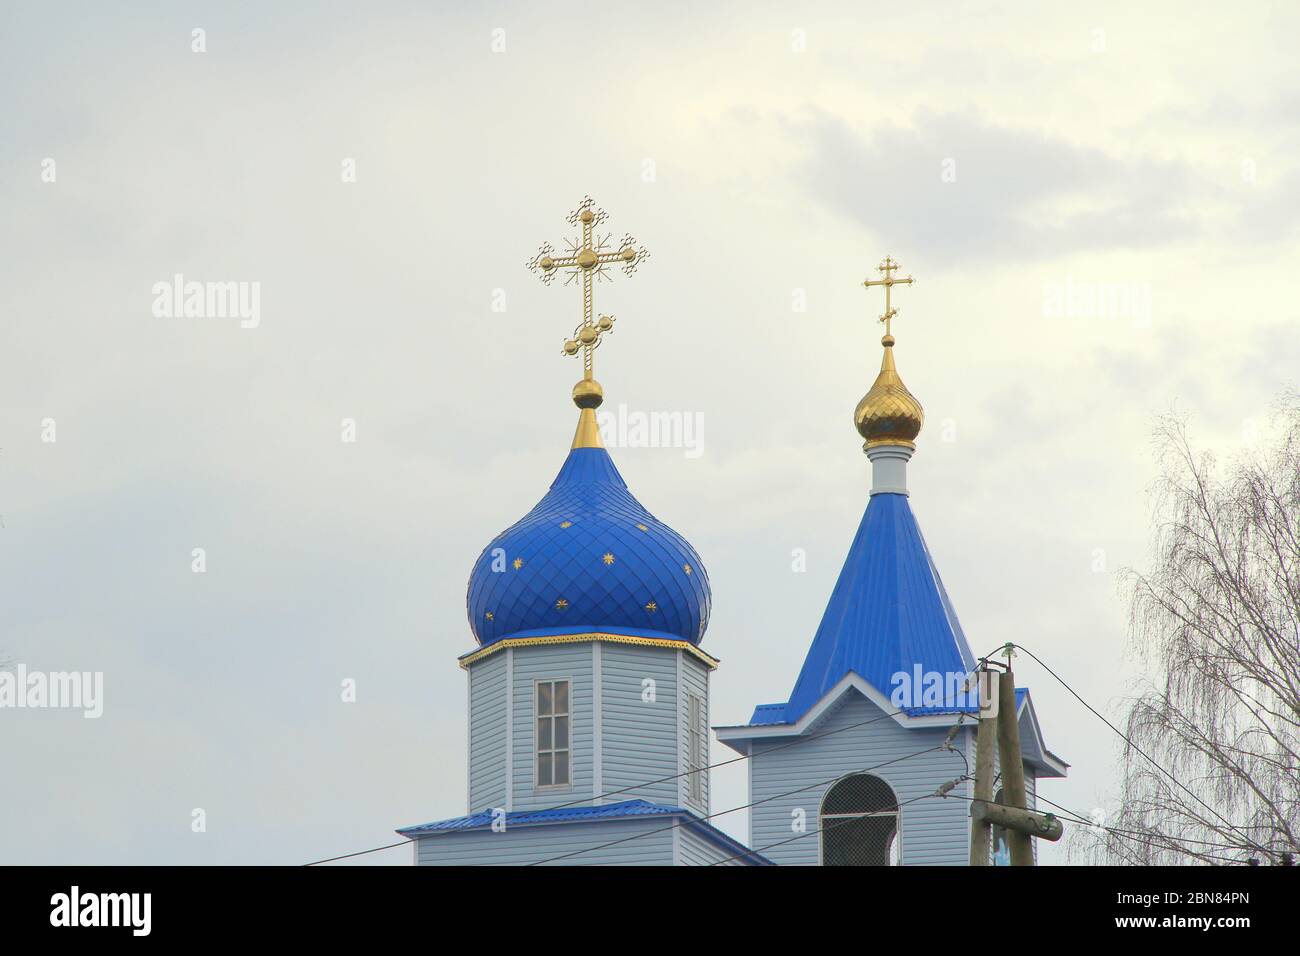 Orthodox Christian church with white walls, blue domes and golden crosses in Russia. A building for religious ceremonies with a bell tower against a cloudy sky in the countryside. Stock Photo